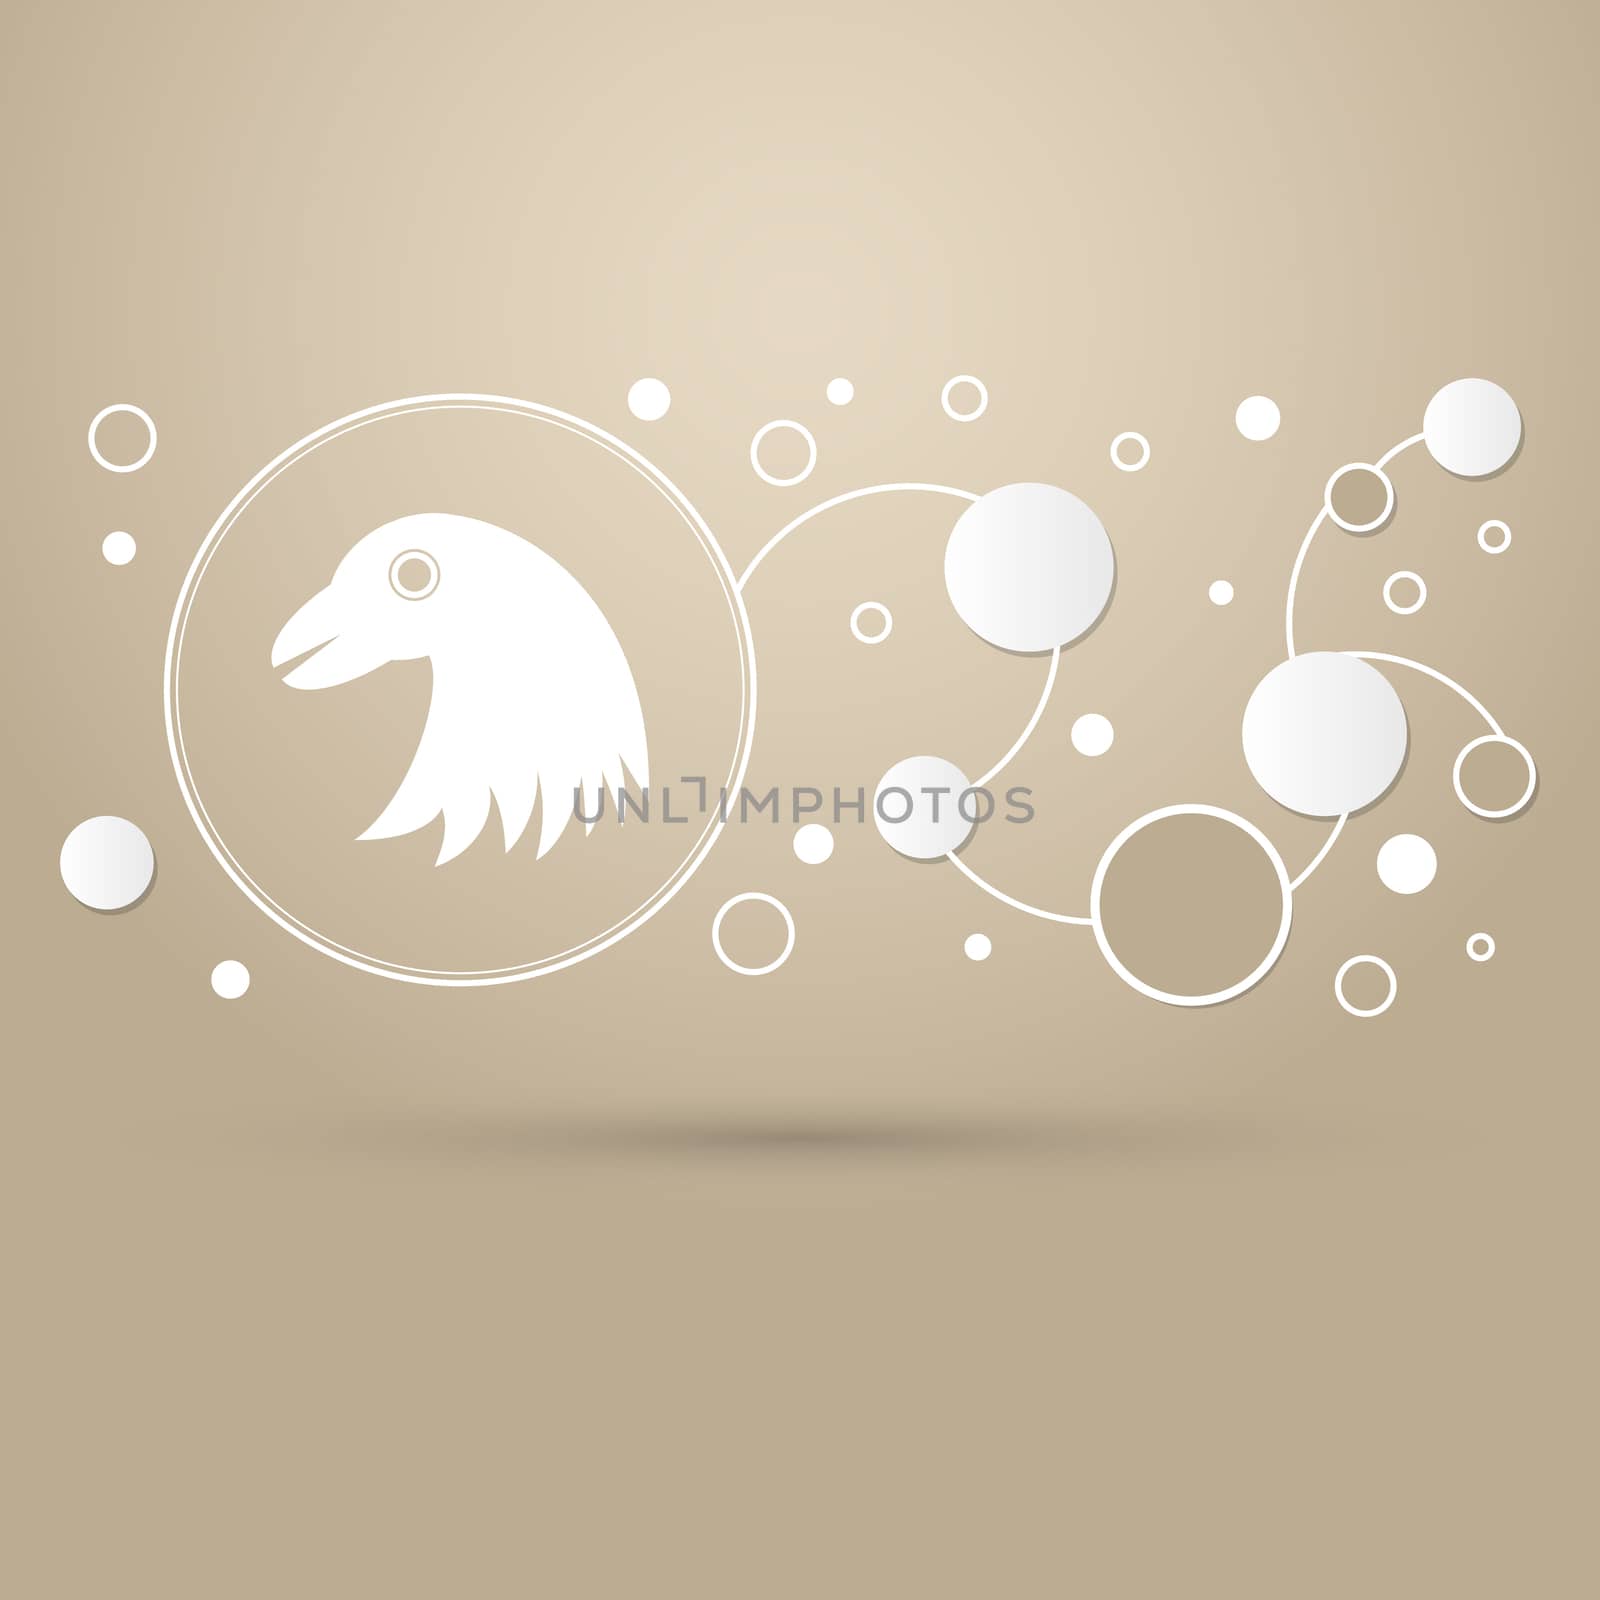 eagle icon on a brown background with elegant style and modern design infographic.  by Adamchuk